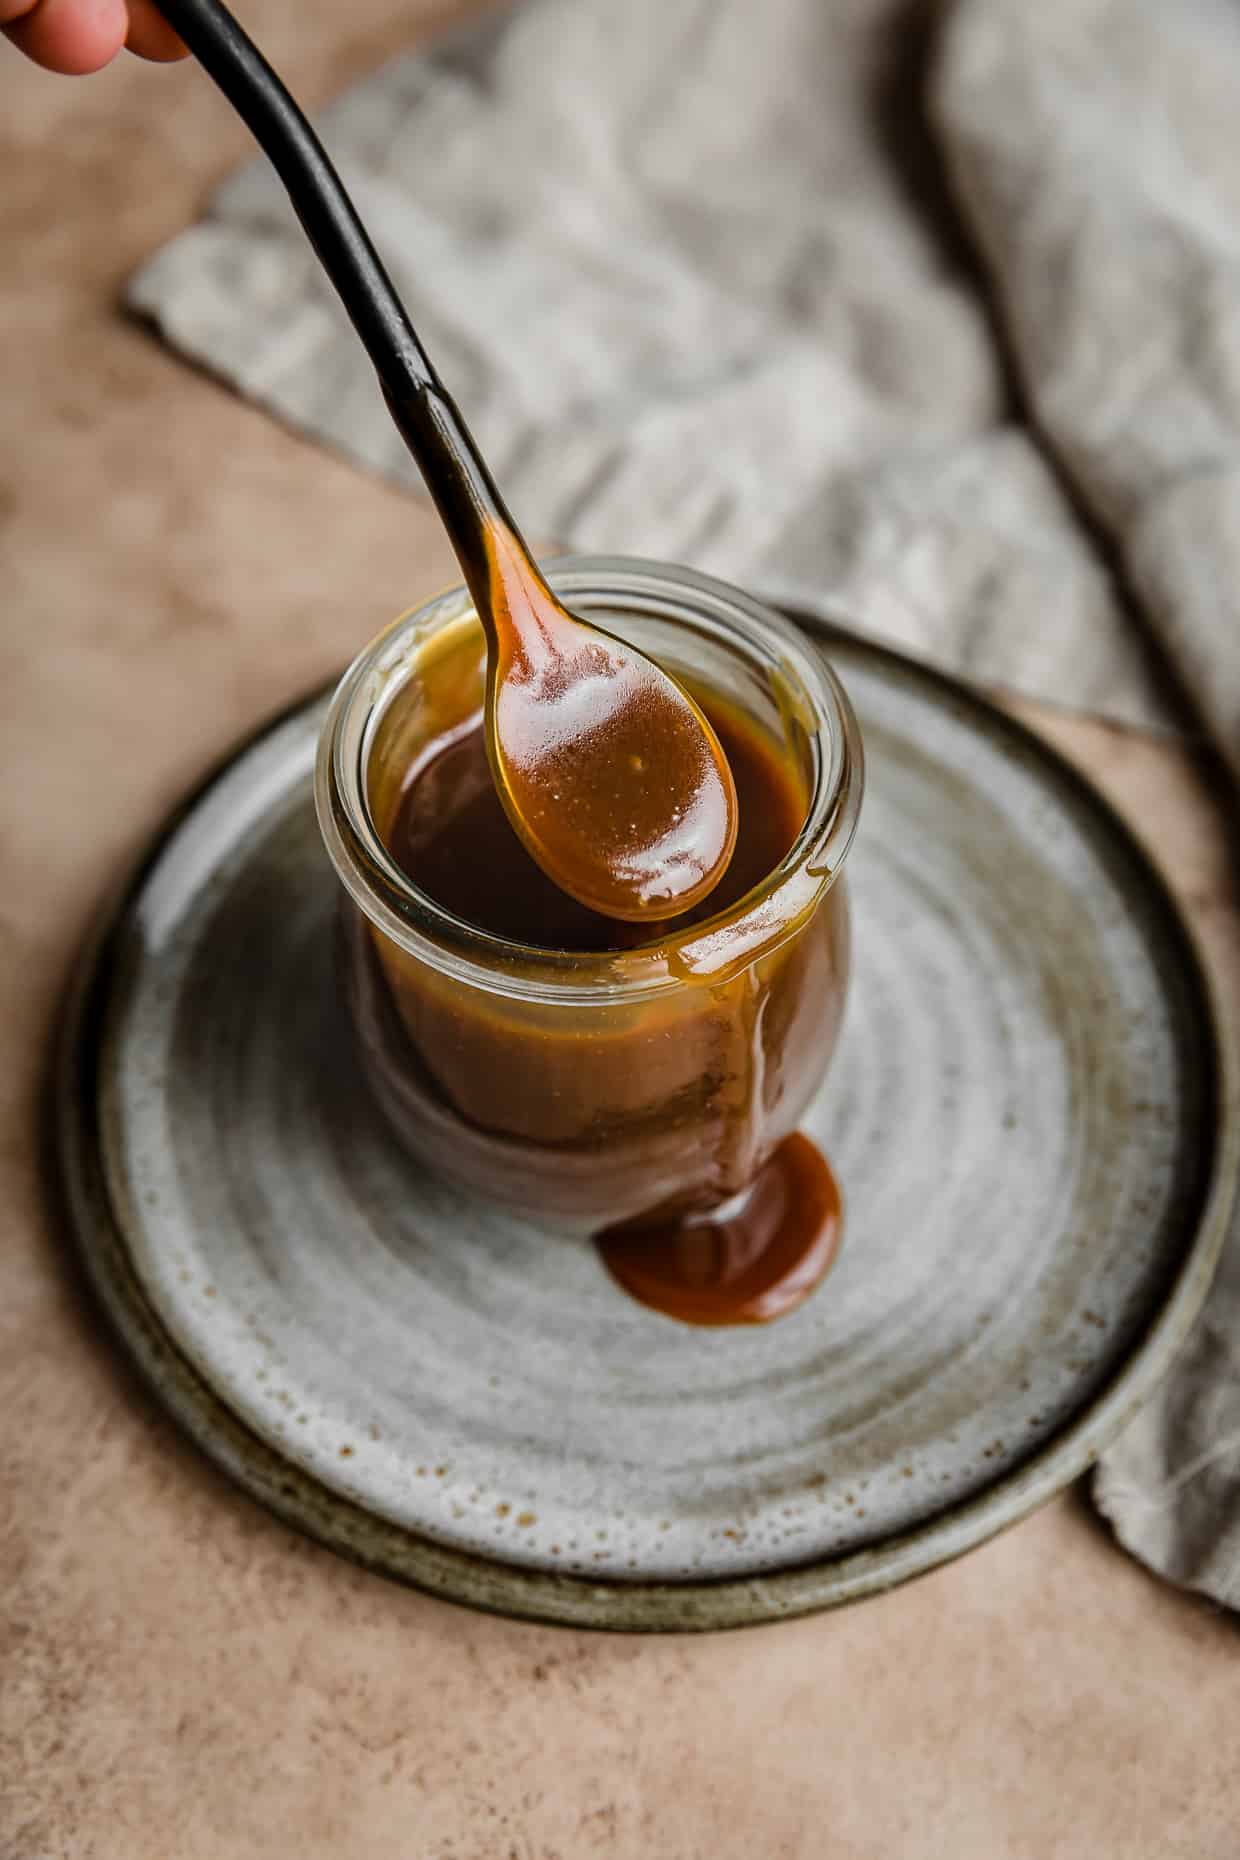 A spoon with Butterscotch Sauce on it.